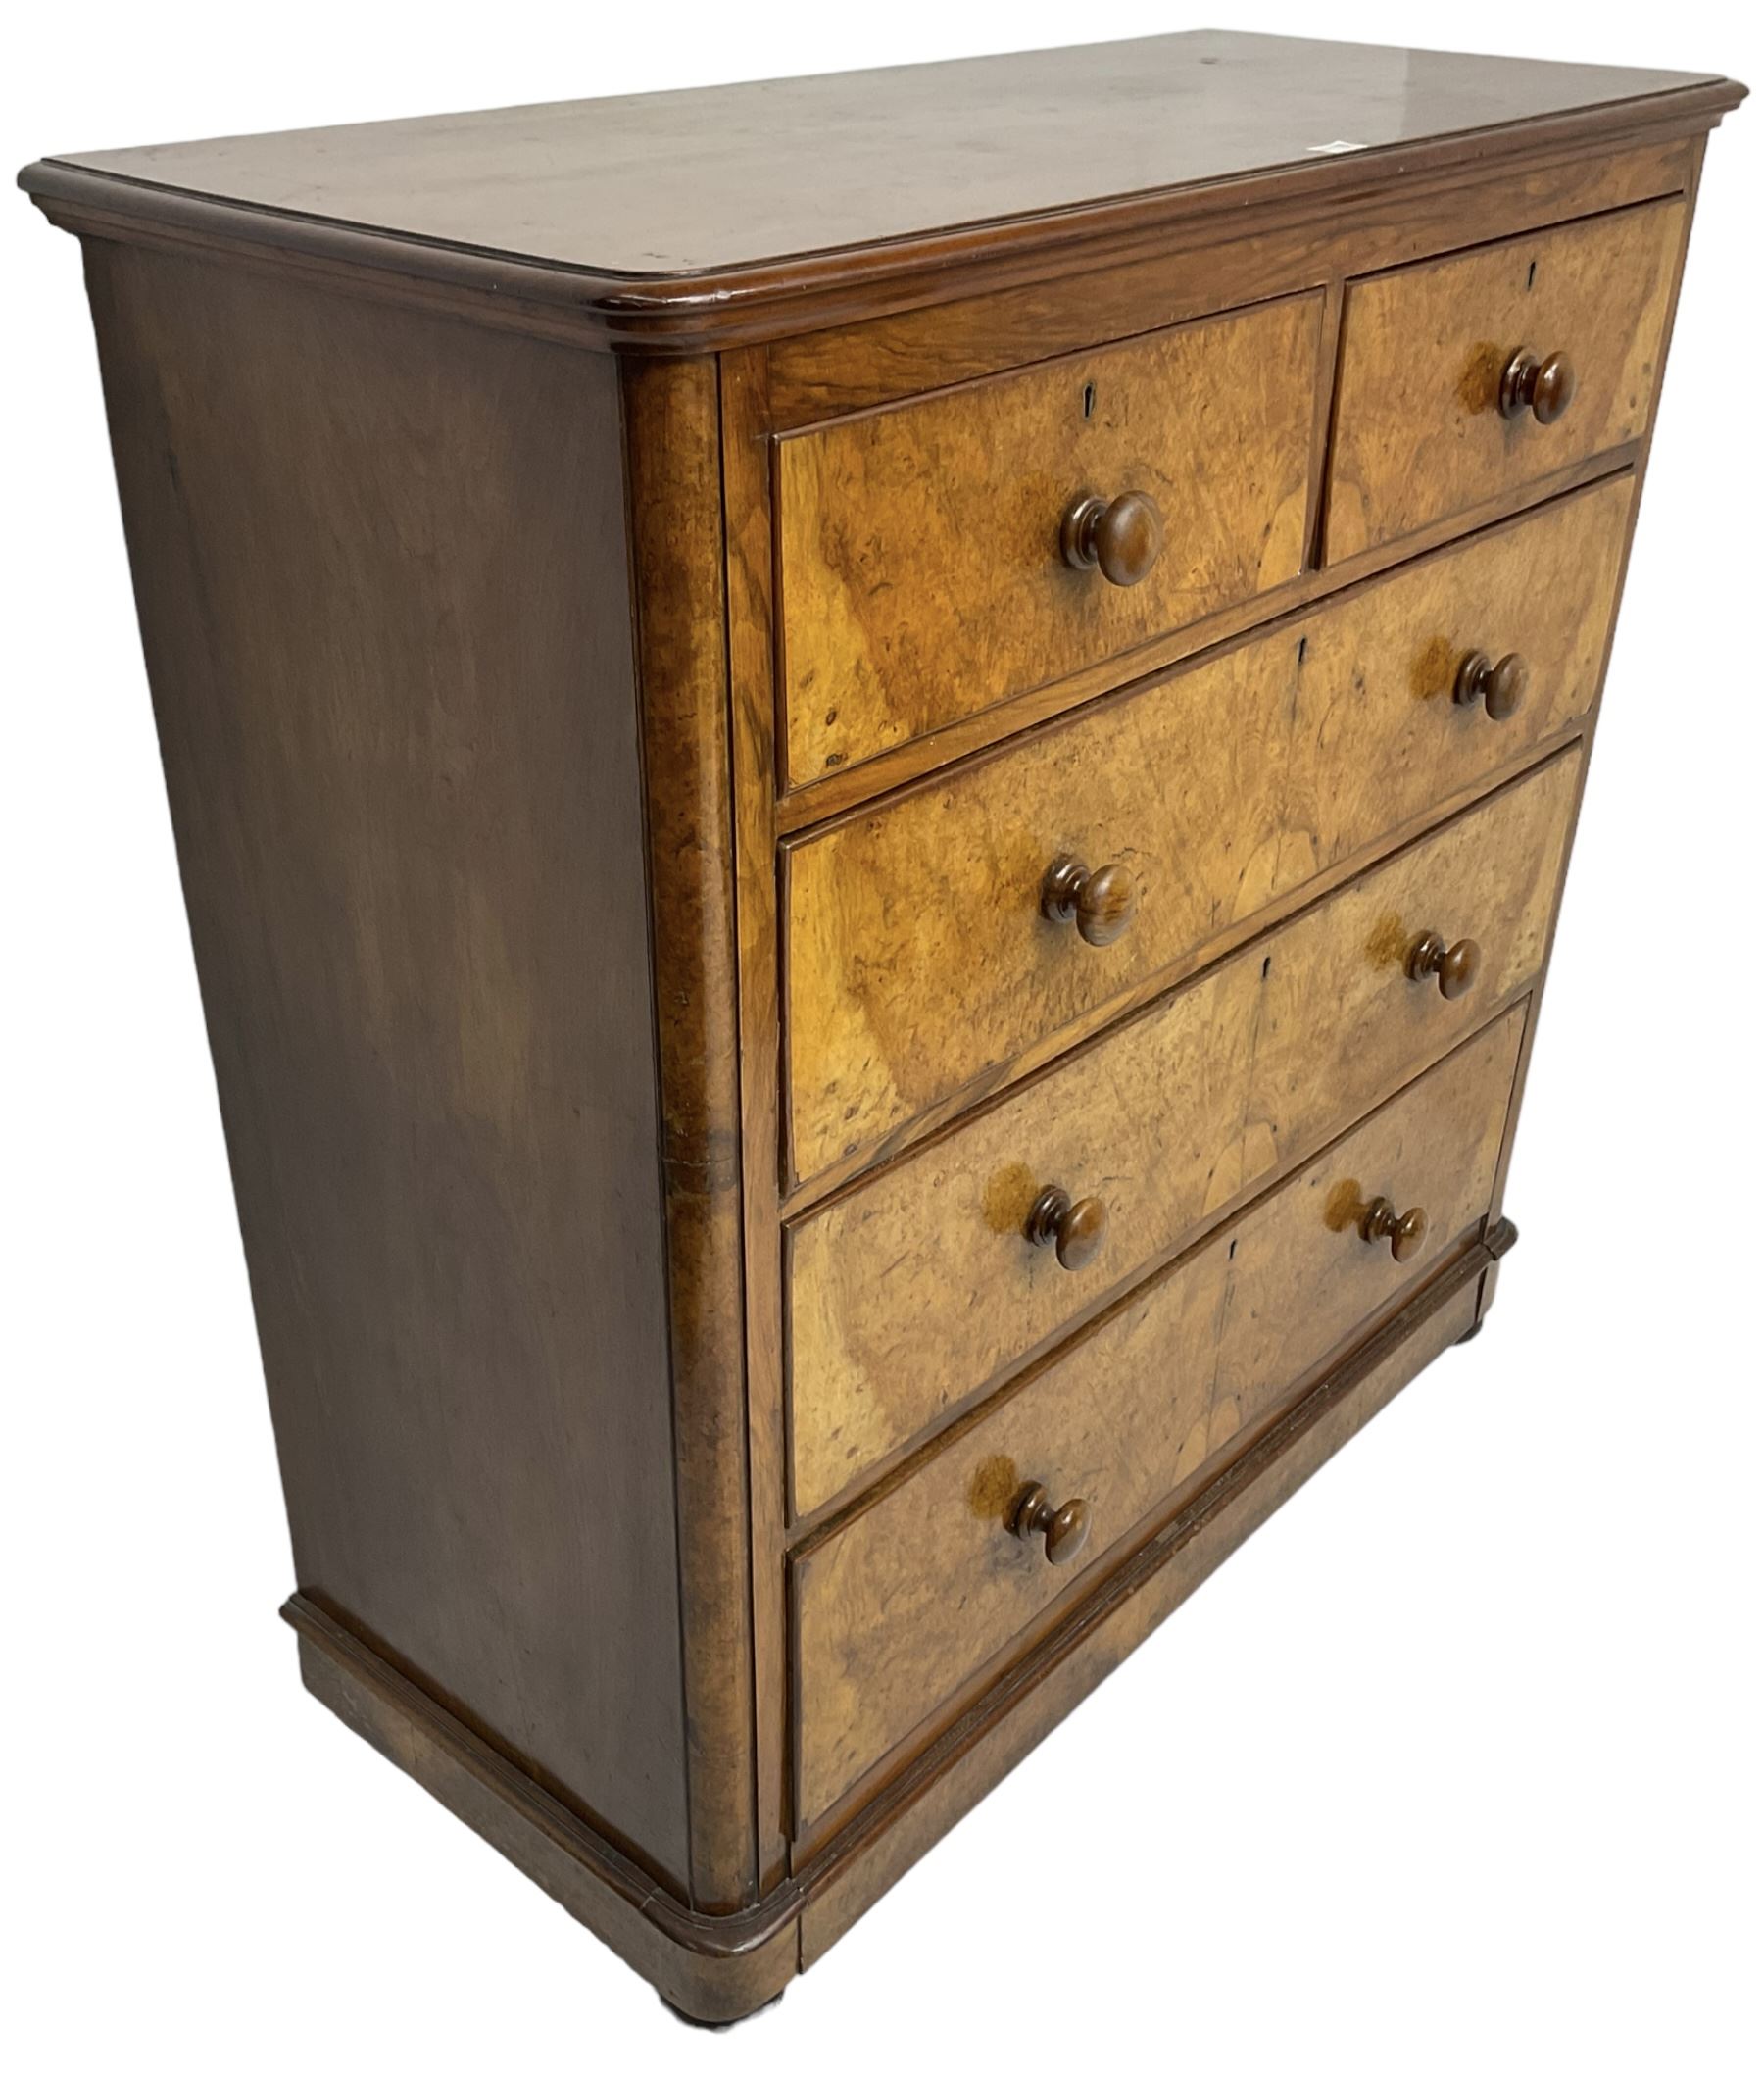 Early 20th century figured walnut chest - Image 3 of 8